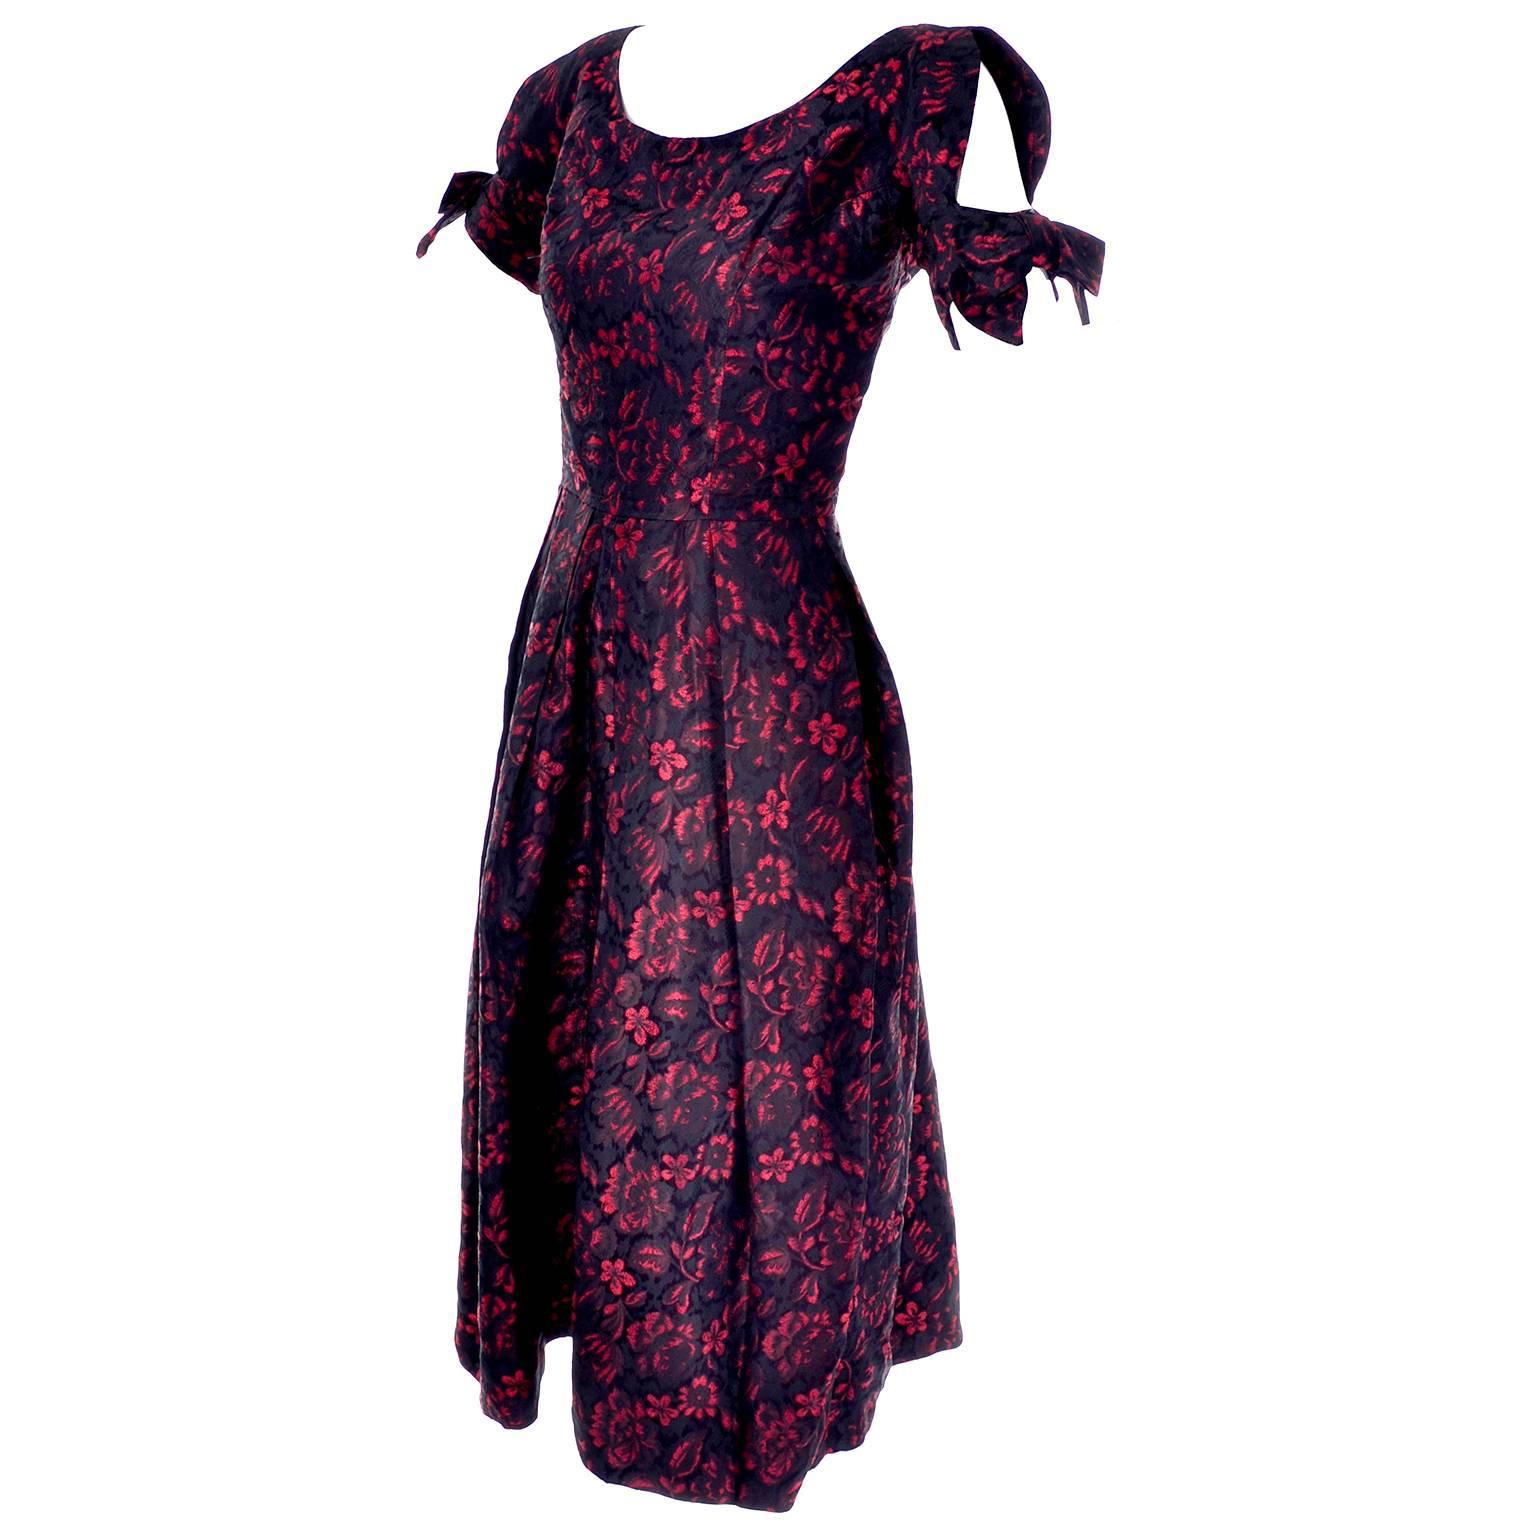 1950s Suzy Perette Red Brocade Floral Vintage Cocktail Dress Dramatic Sleeves 6